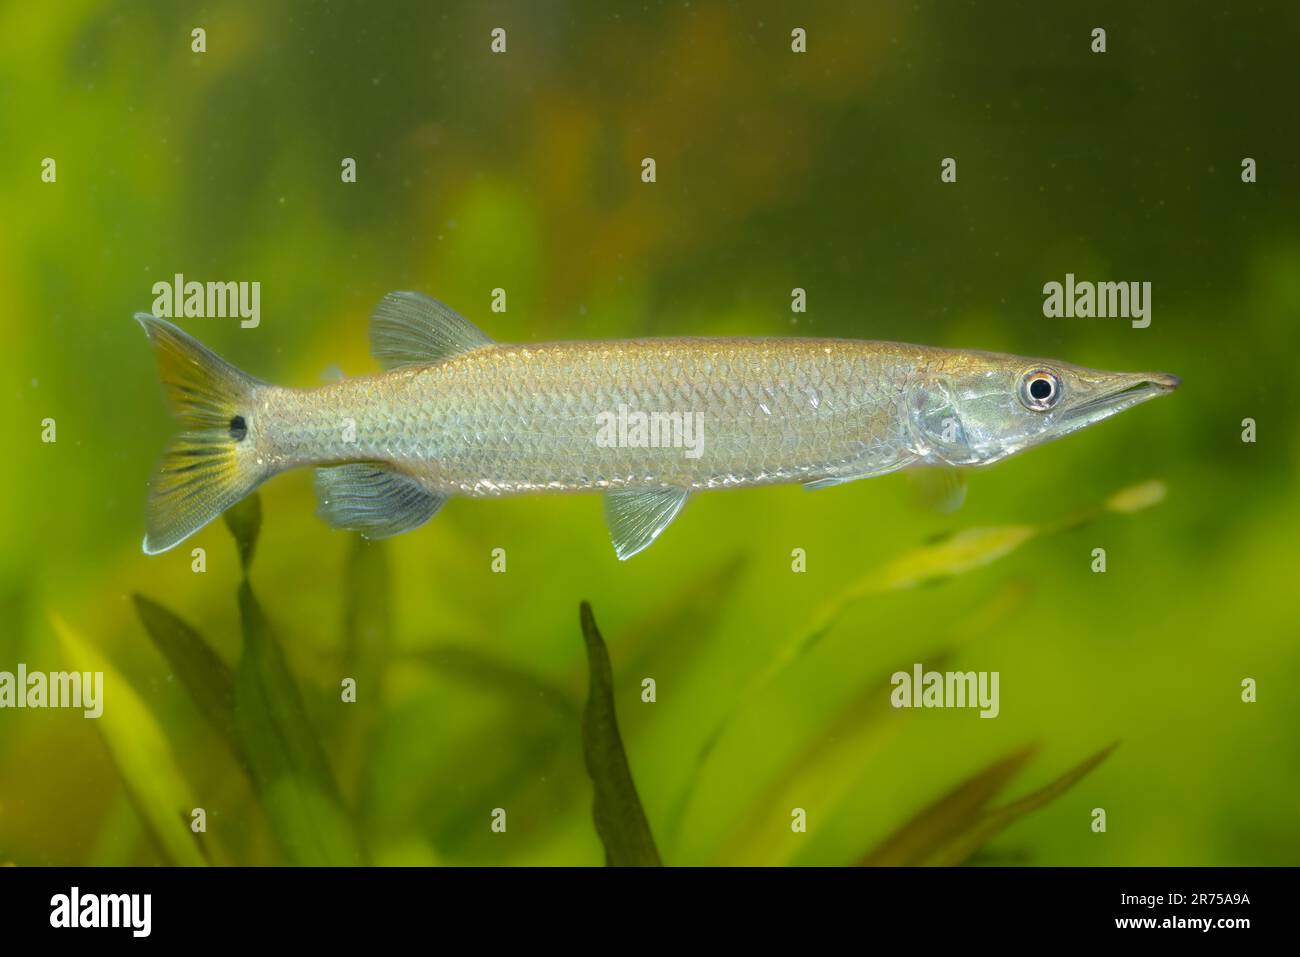 African pike characins, hepsetids (Ctenolucius hujeta), swimming male, side view Stock Photo